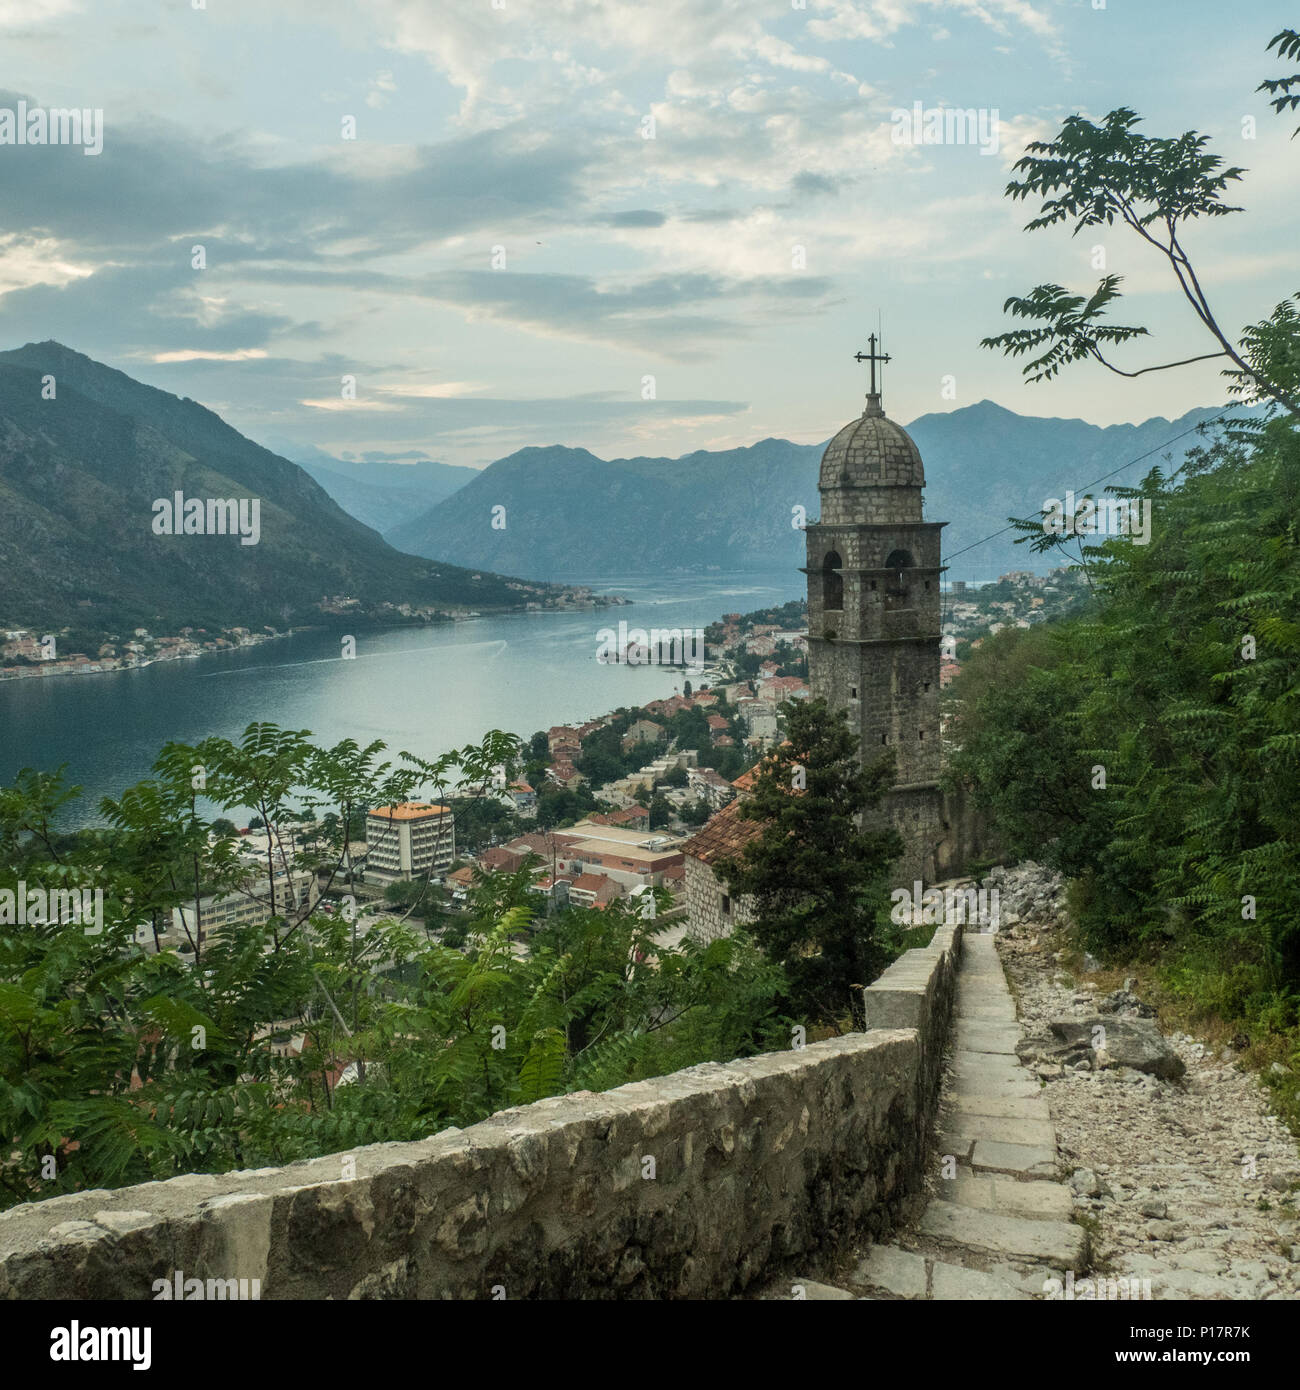 The fortified town of Kotor in a Bay in Montenegro along the adriatic sea. Stock Photo